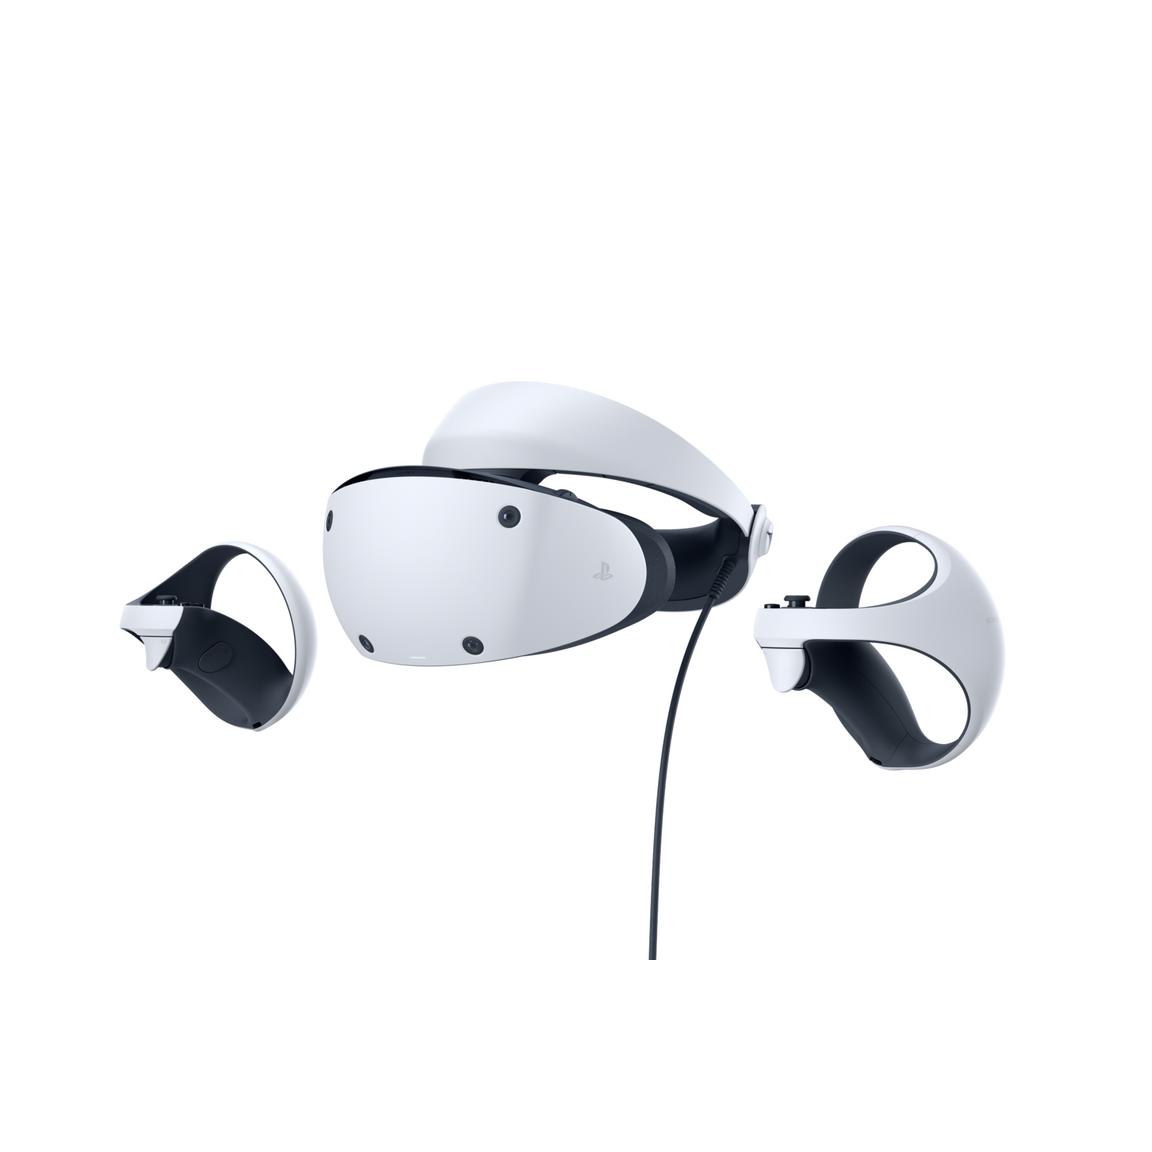 Sony Playstation VR2 Available by Order Only